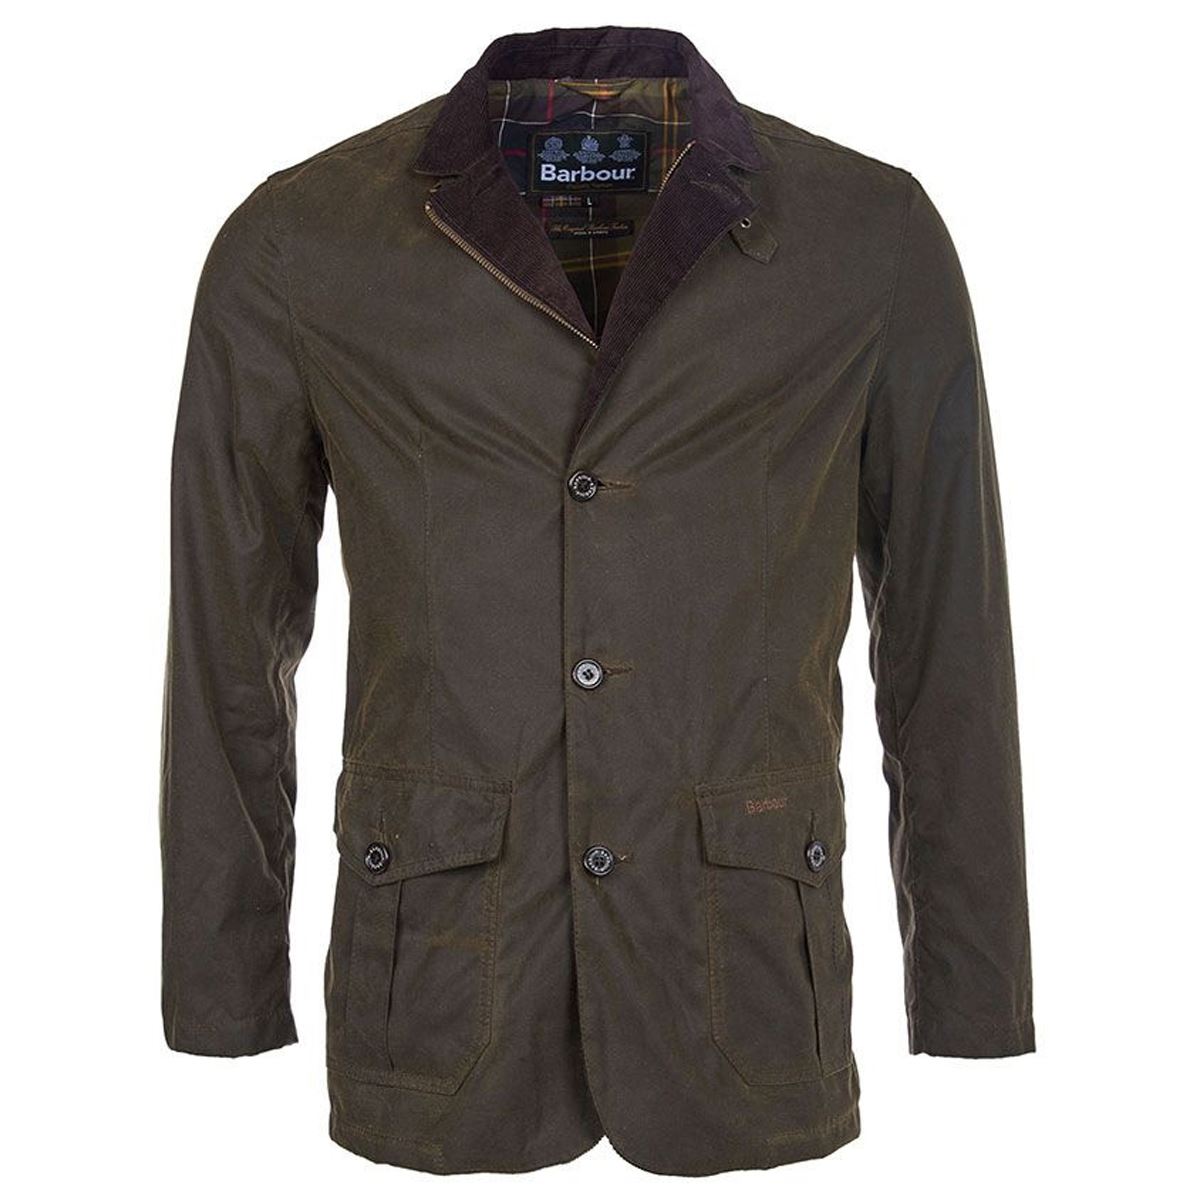 What is a Barbour jacket lining made of?